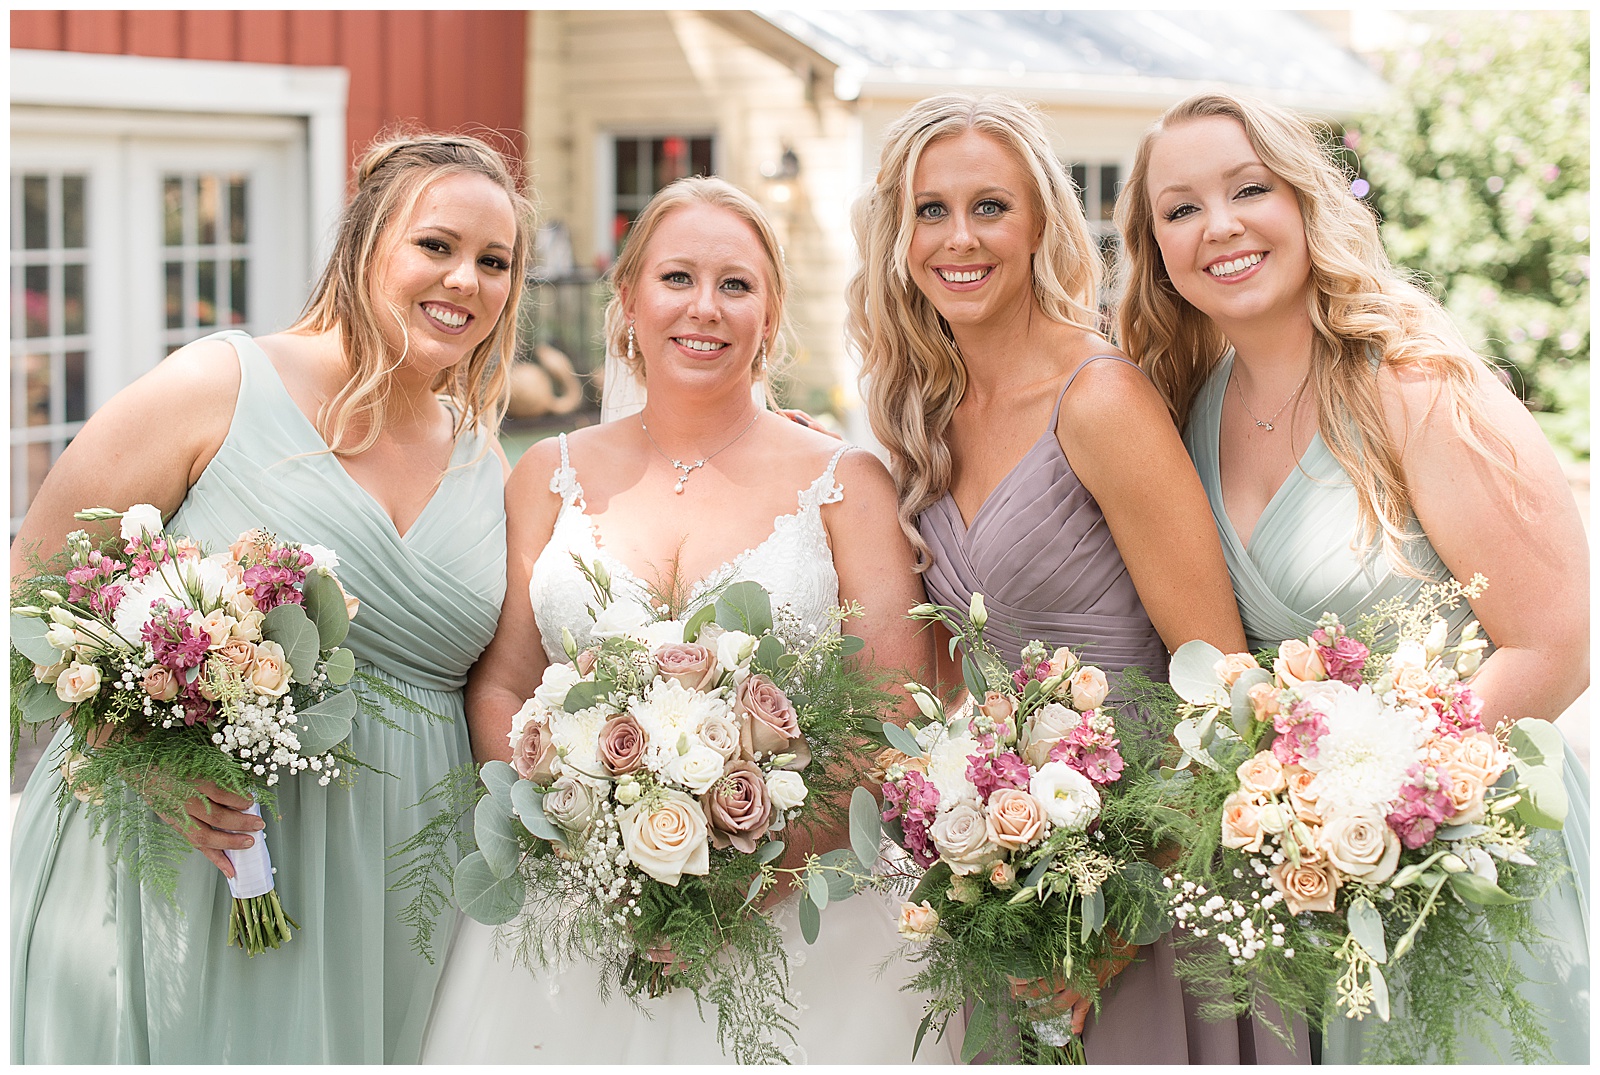 bridesmaids photo with white and pink flowers standing in front of red barn